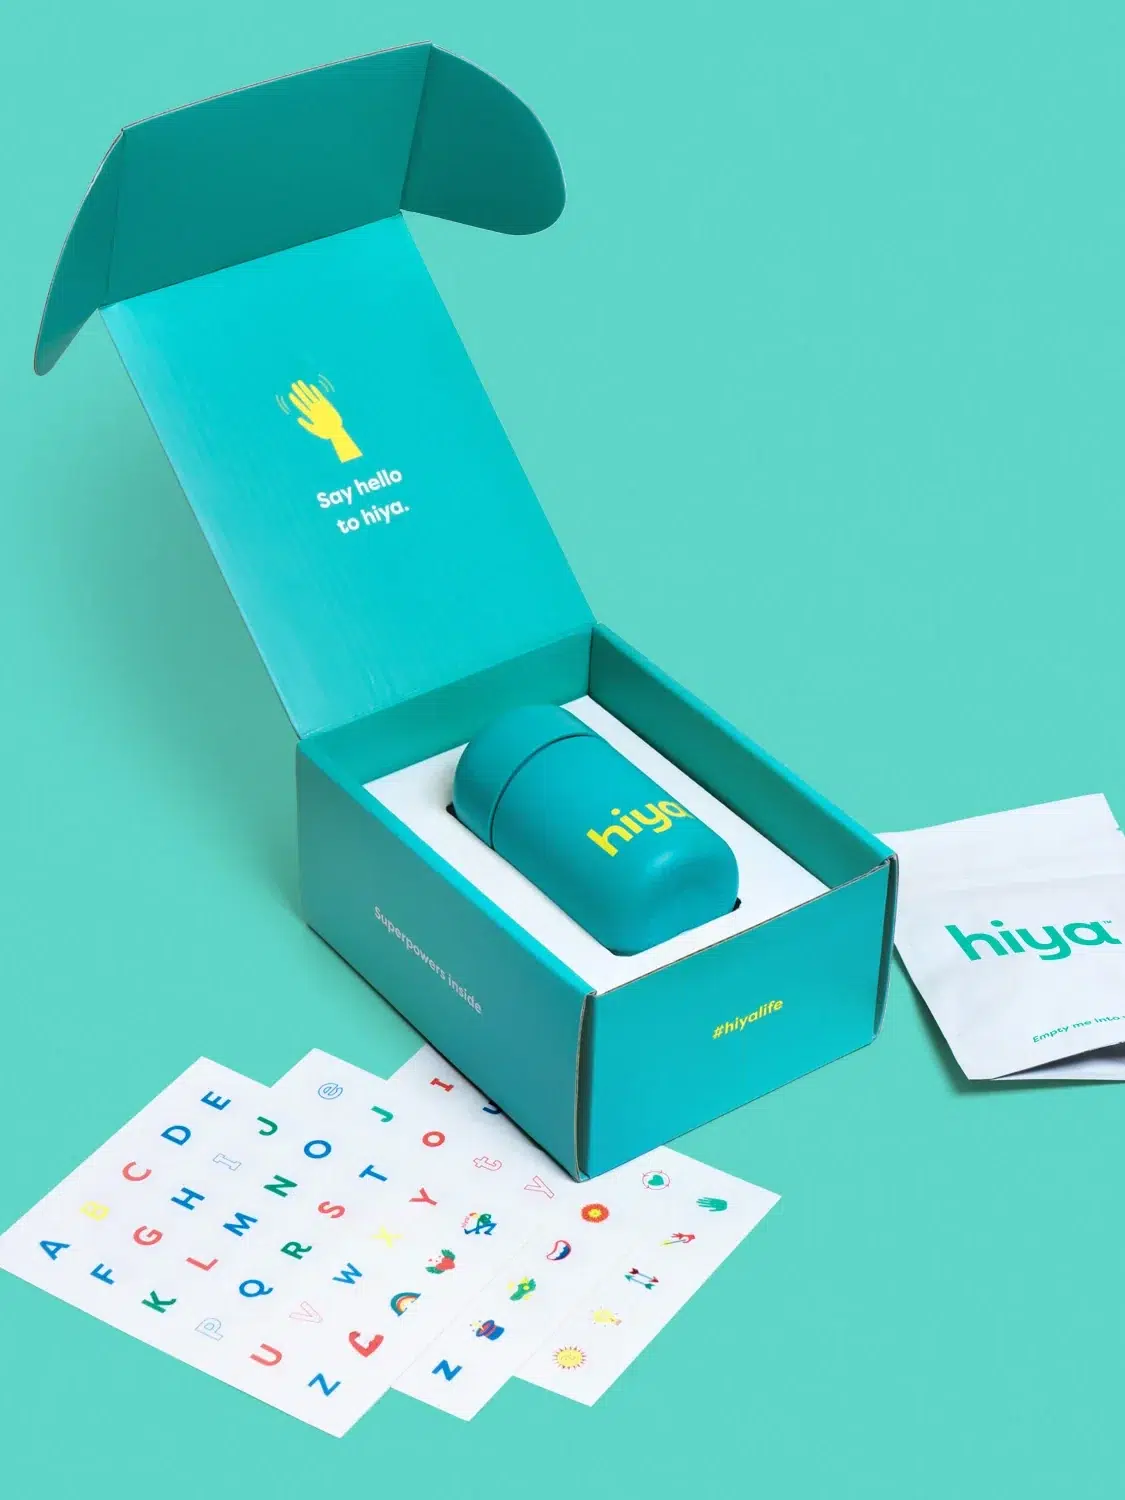 A children's vitamin product presented with its packaging, informational booklet, and alphabet stickers on a teal background.